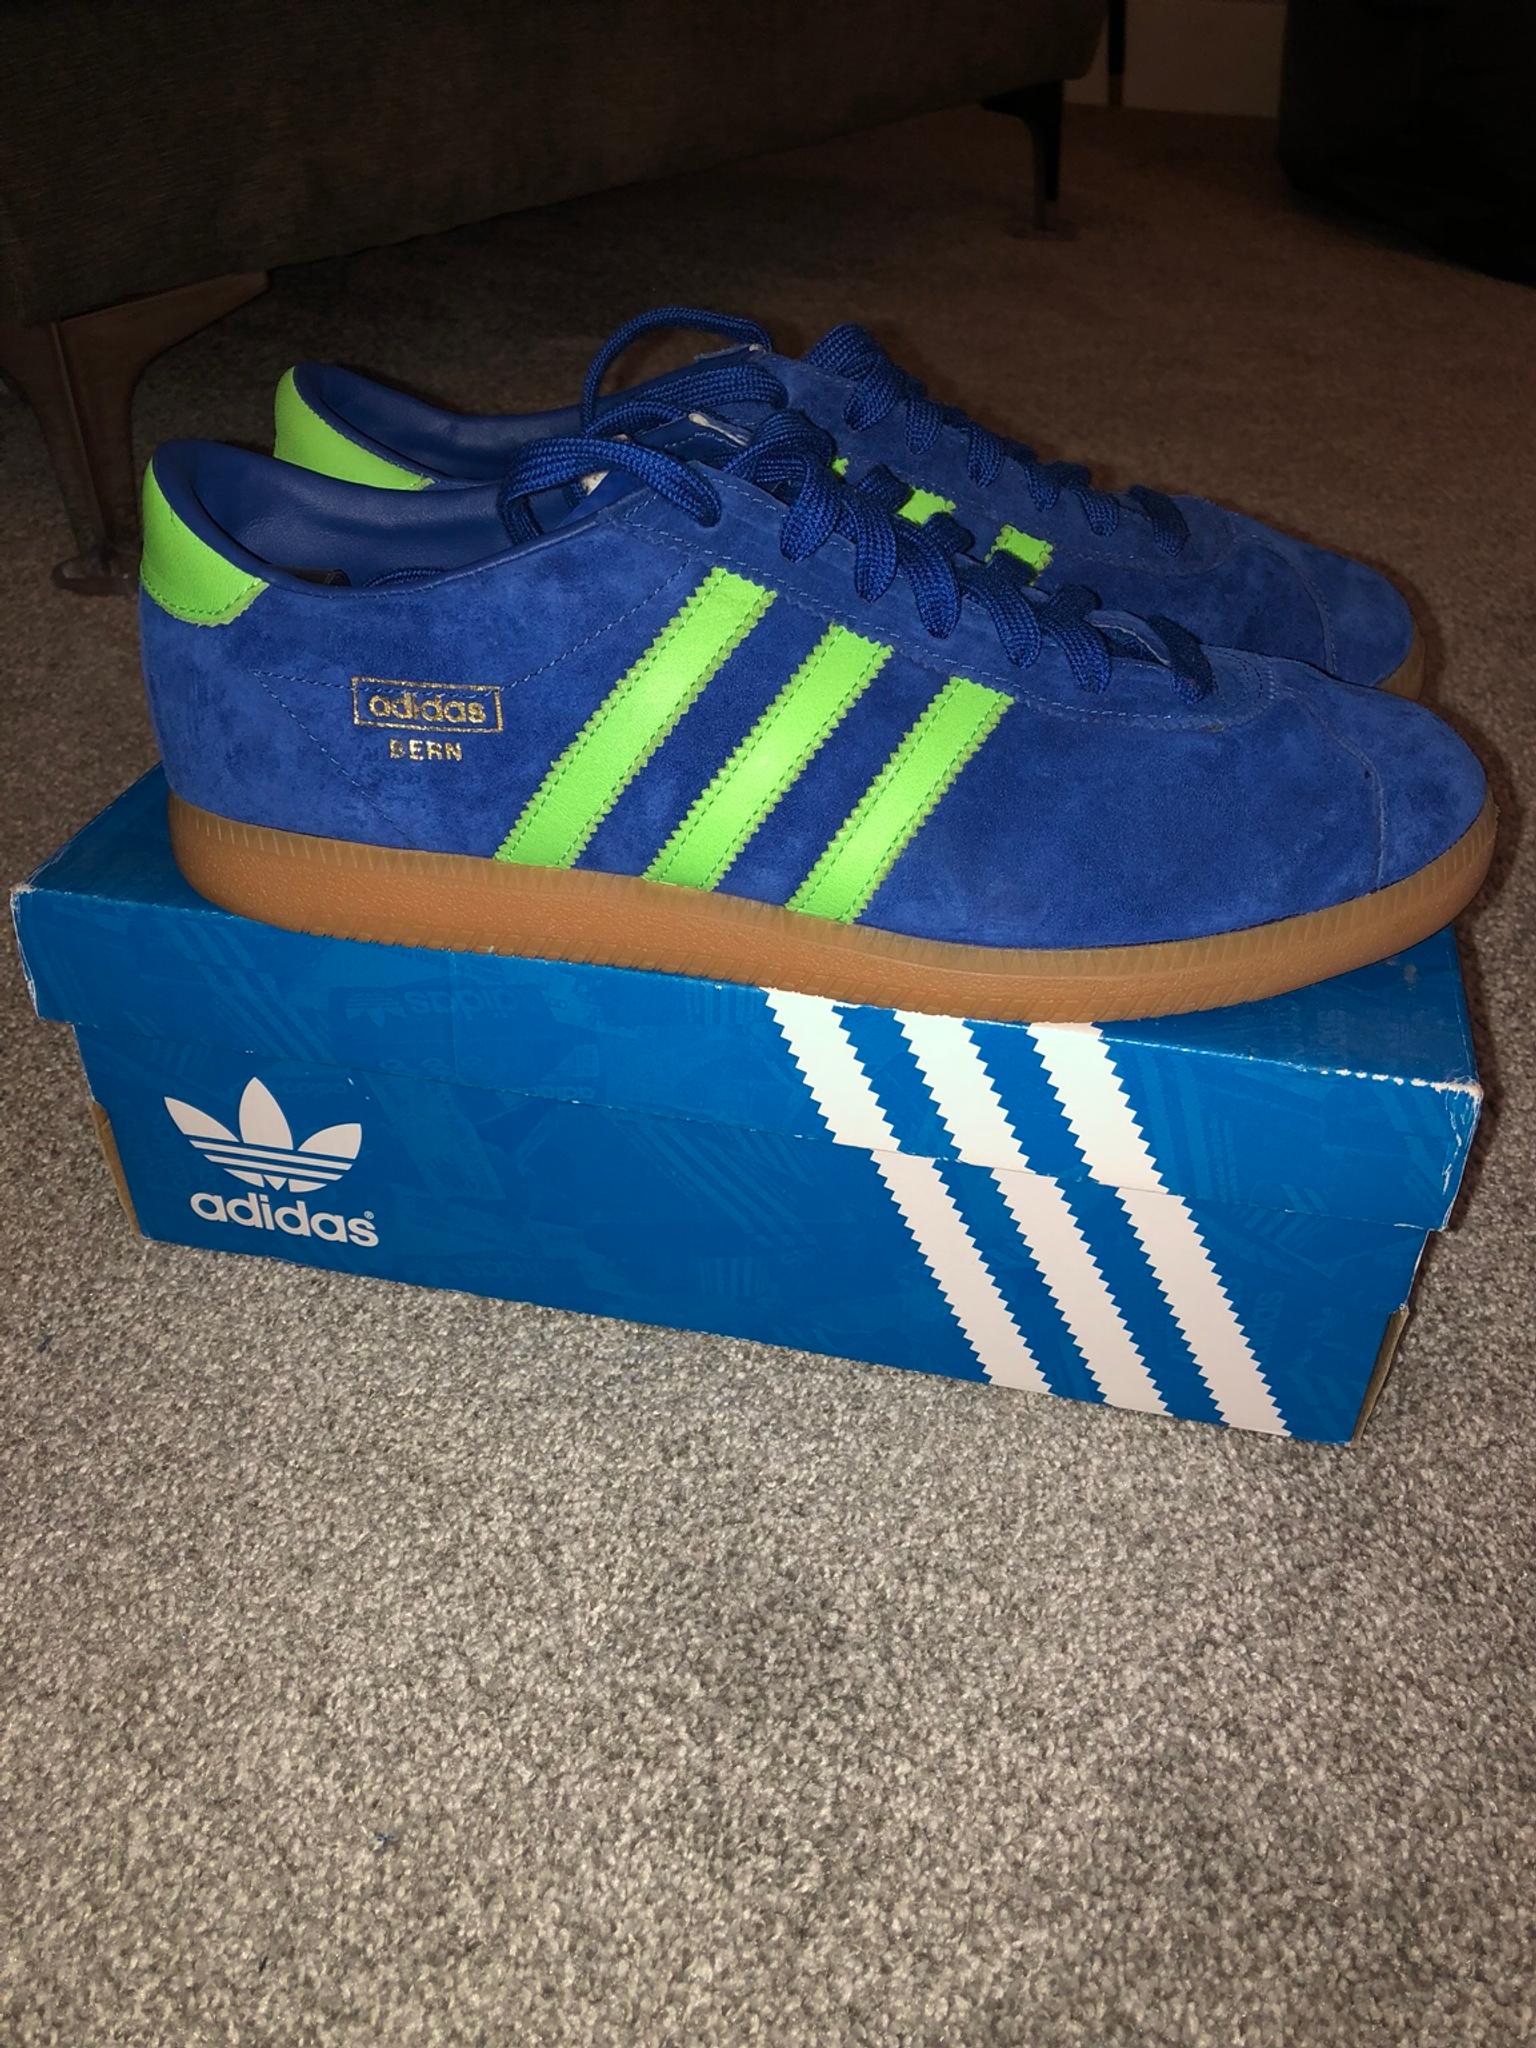 adidas deadstock size 9